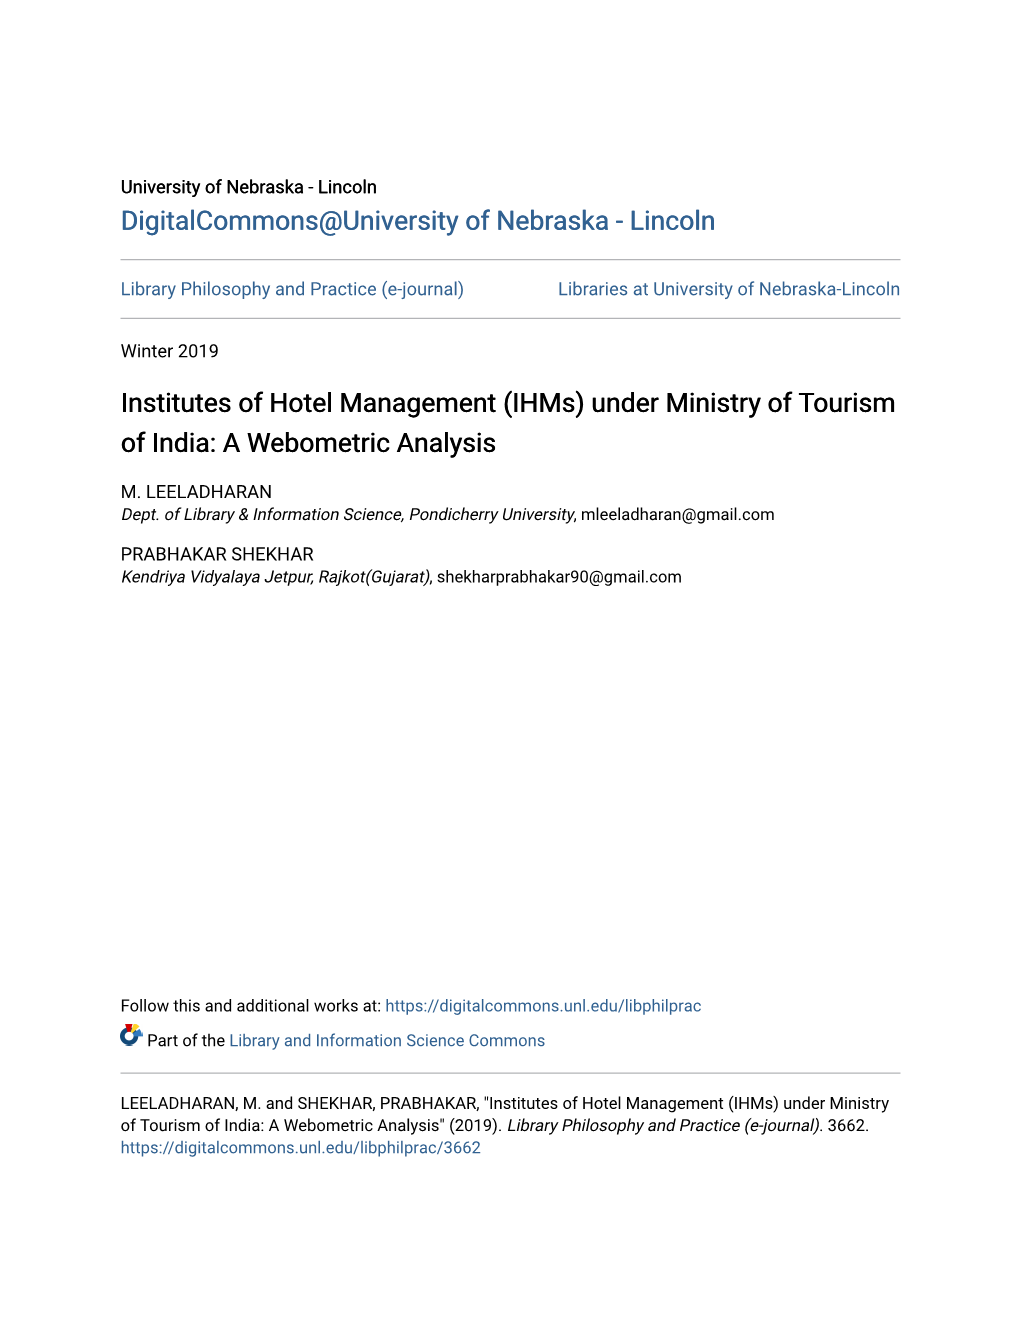 Institutes of Hotel Management (Ihms) Under Ministry of Tourism of India: a Webometric Analysis